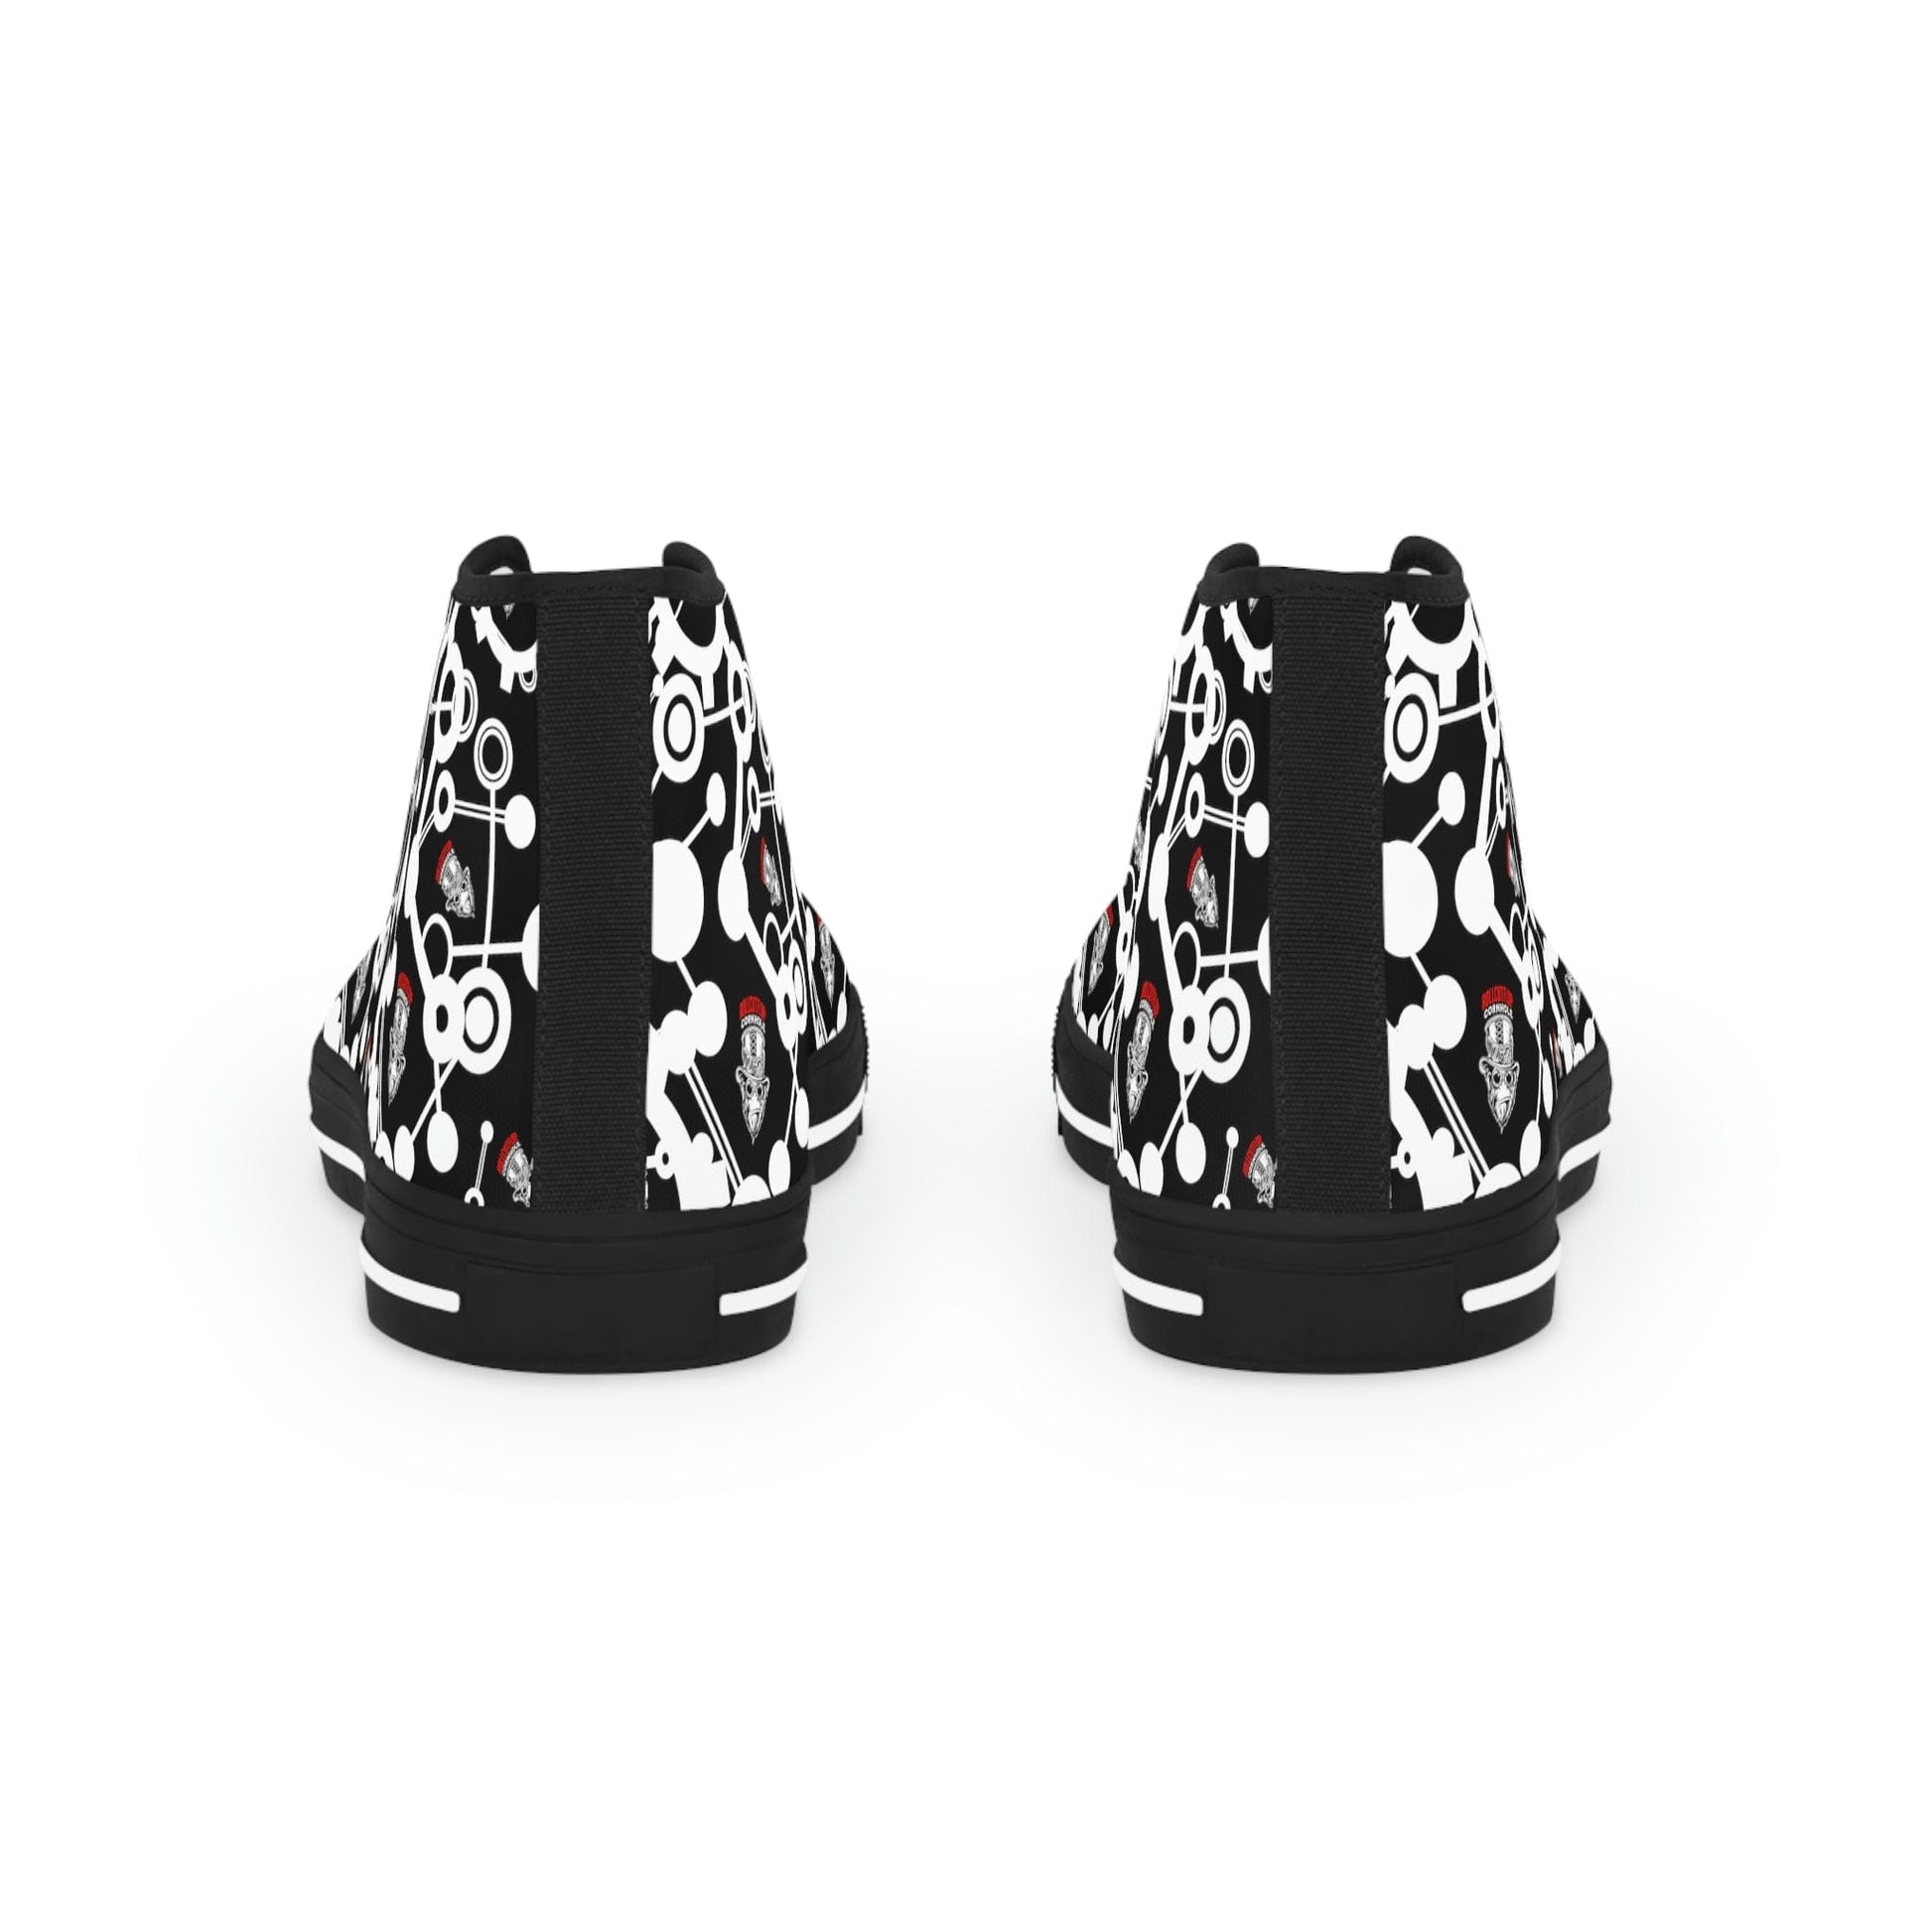 Back of Roll Cut Flop Cornhole™ All Over Print Black, Red & White Men's High Top Sneakers - Steampunk Gorilla Logo with White Gear Print